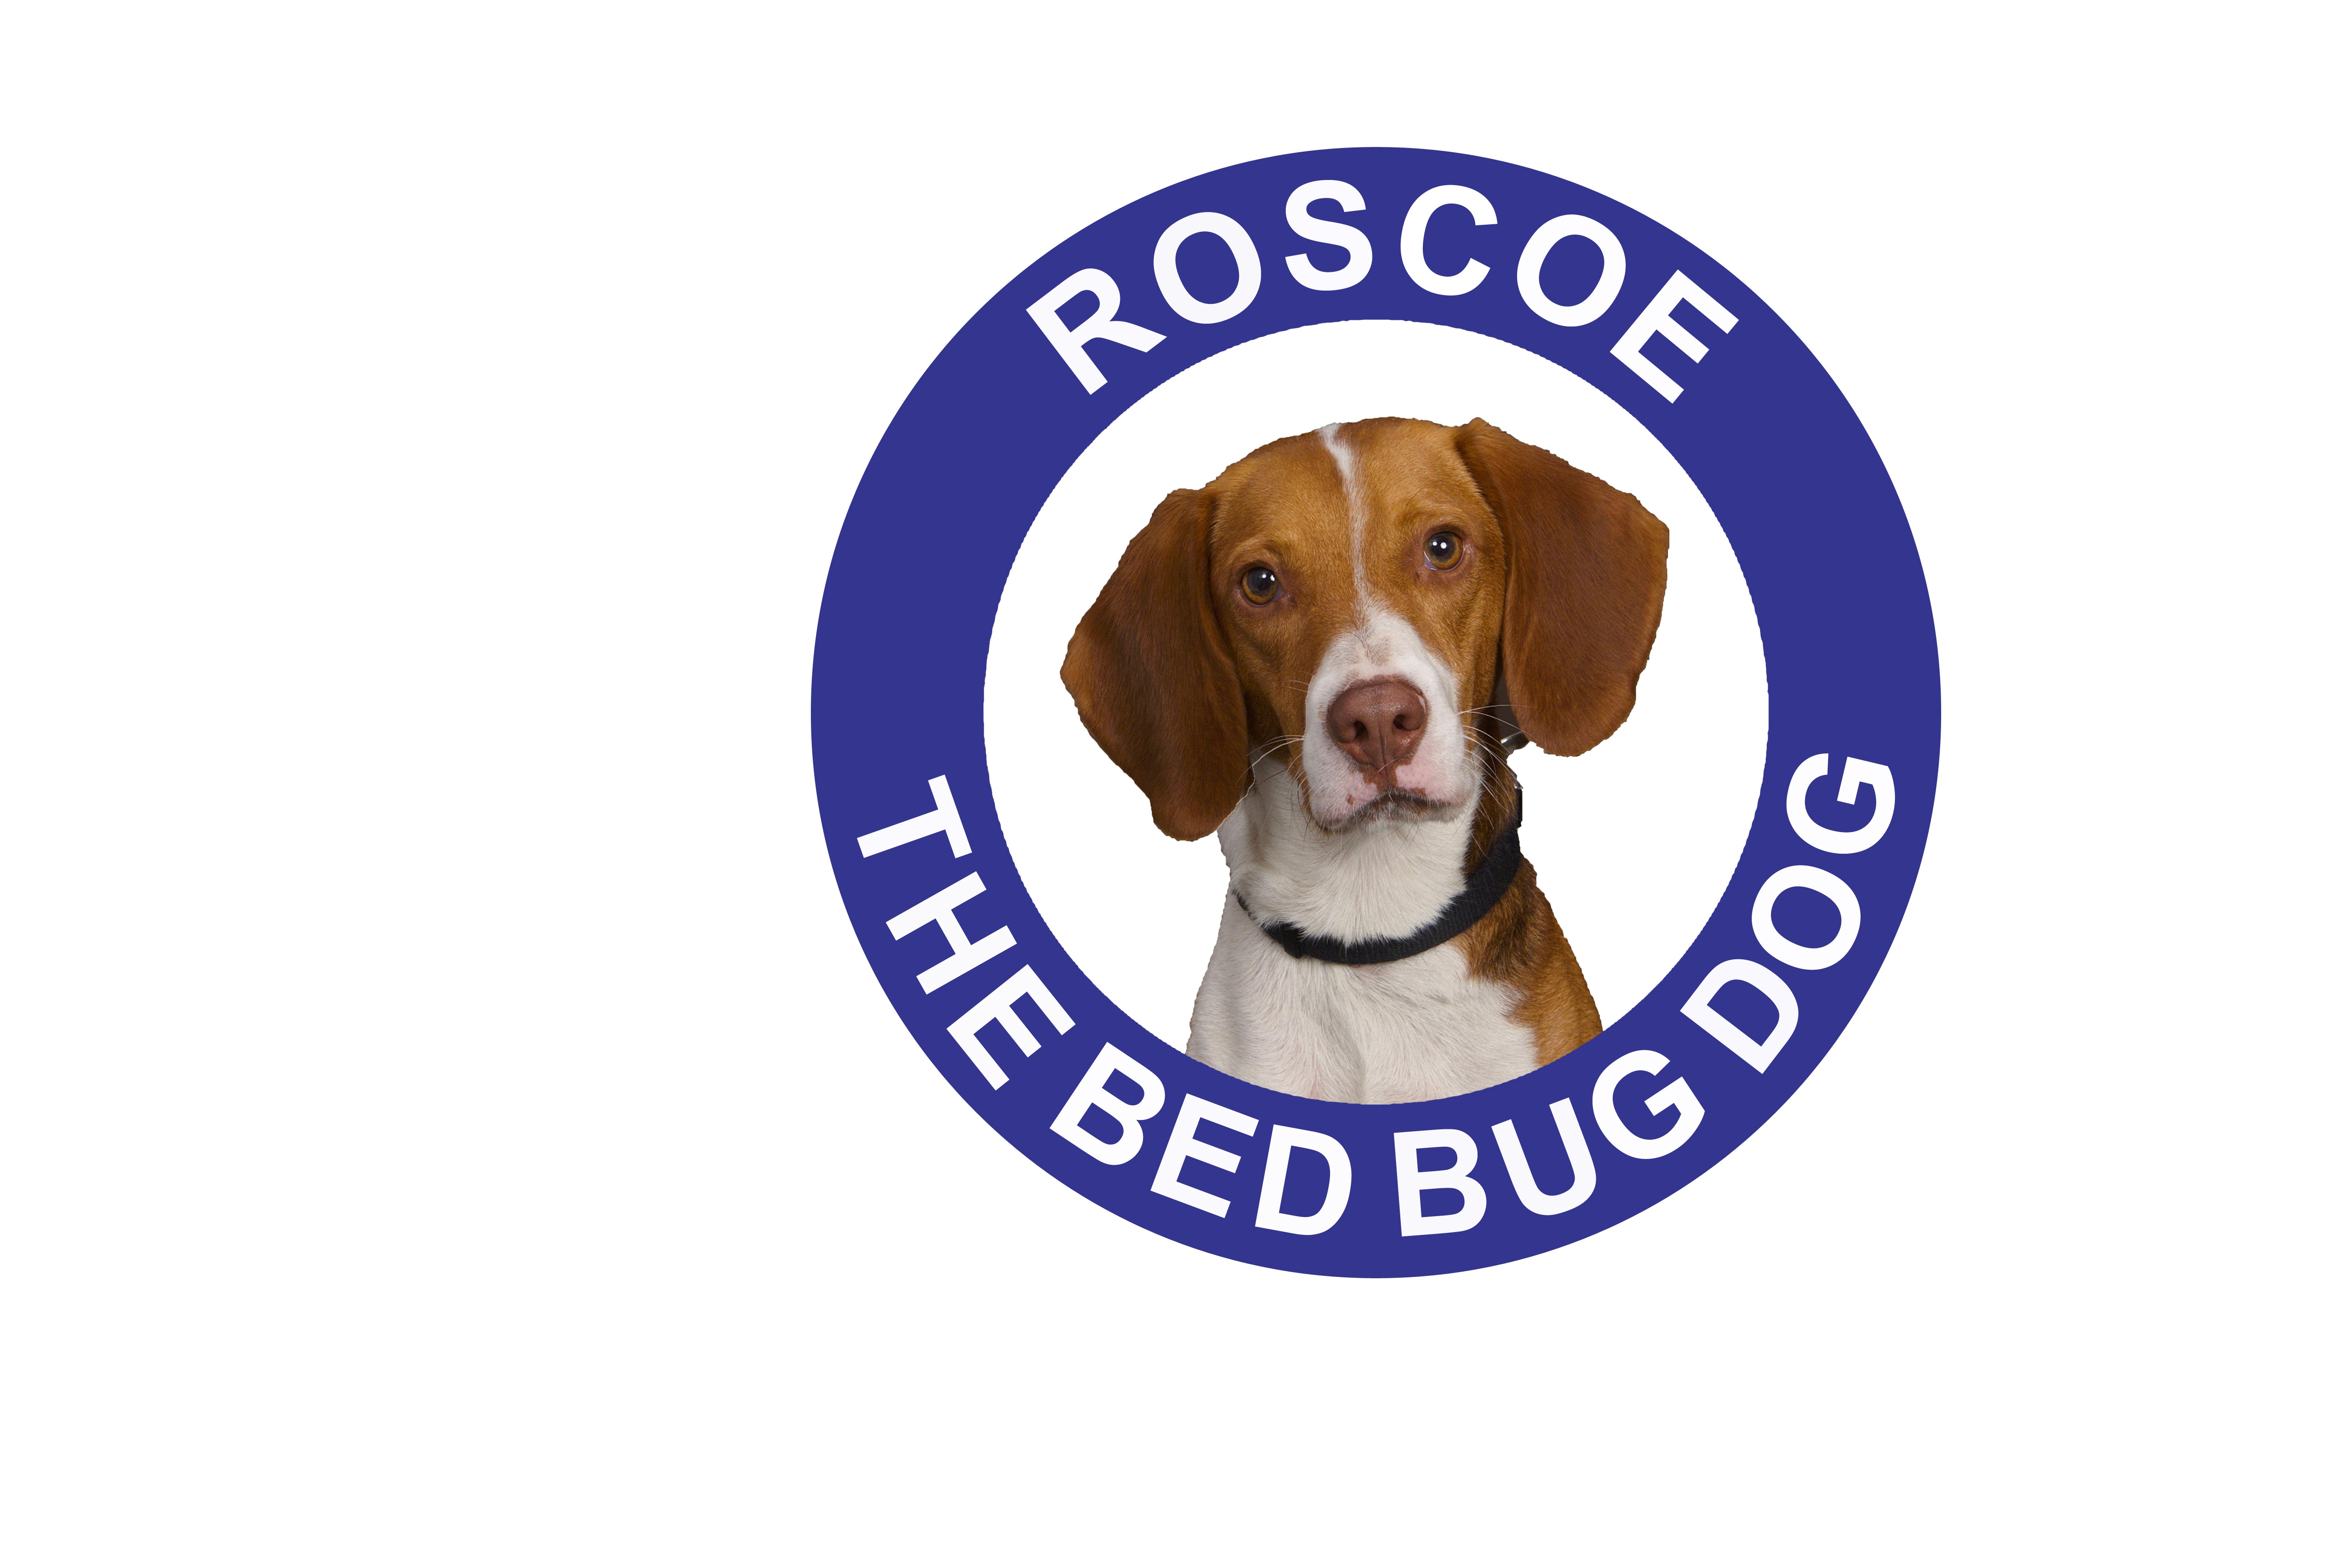 New York's heat wave is keeping Roscoe the Bed Bug Dog, lead canine detective of Bell Environmental is busier than ever.